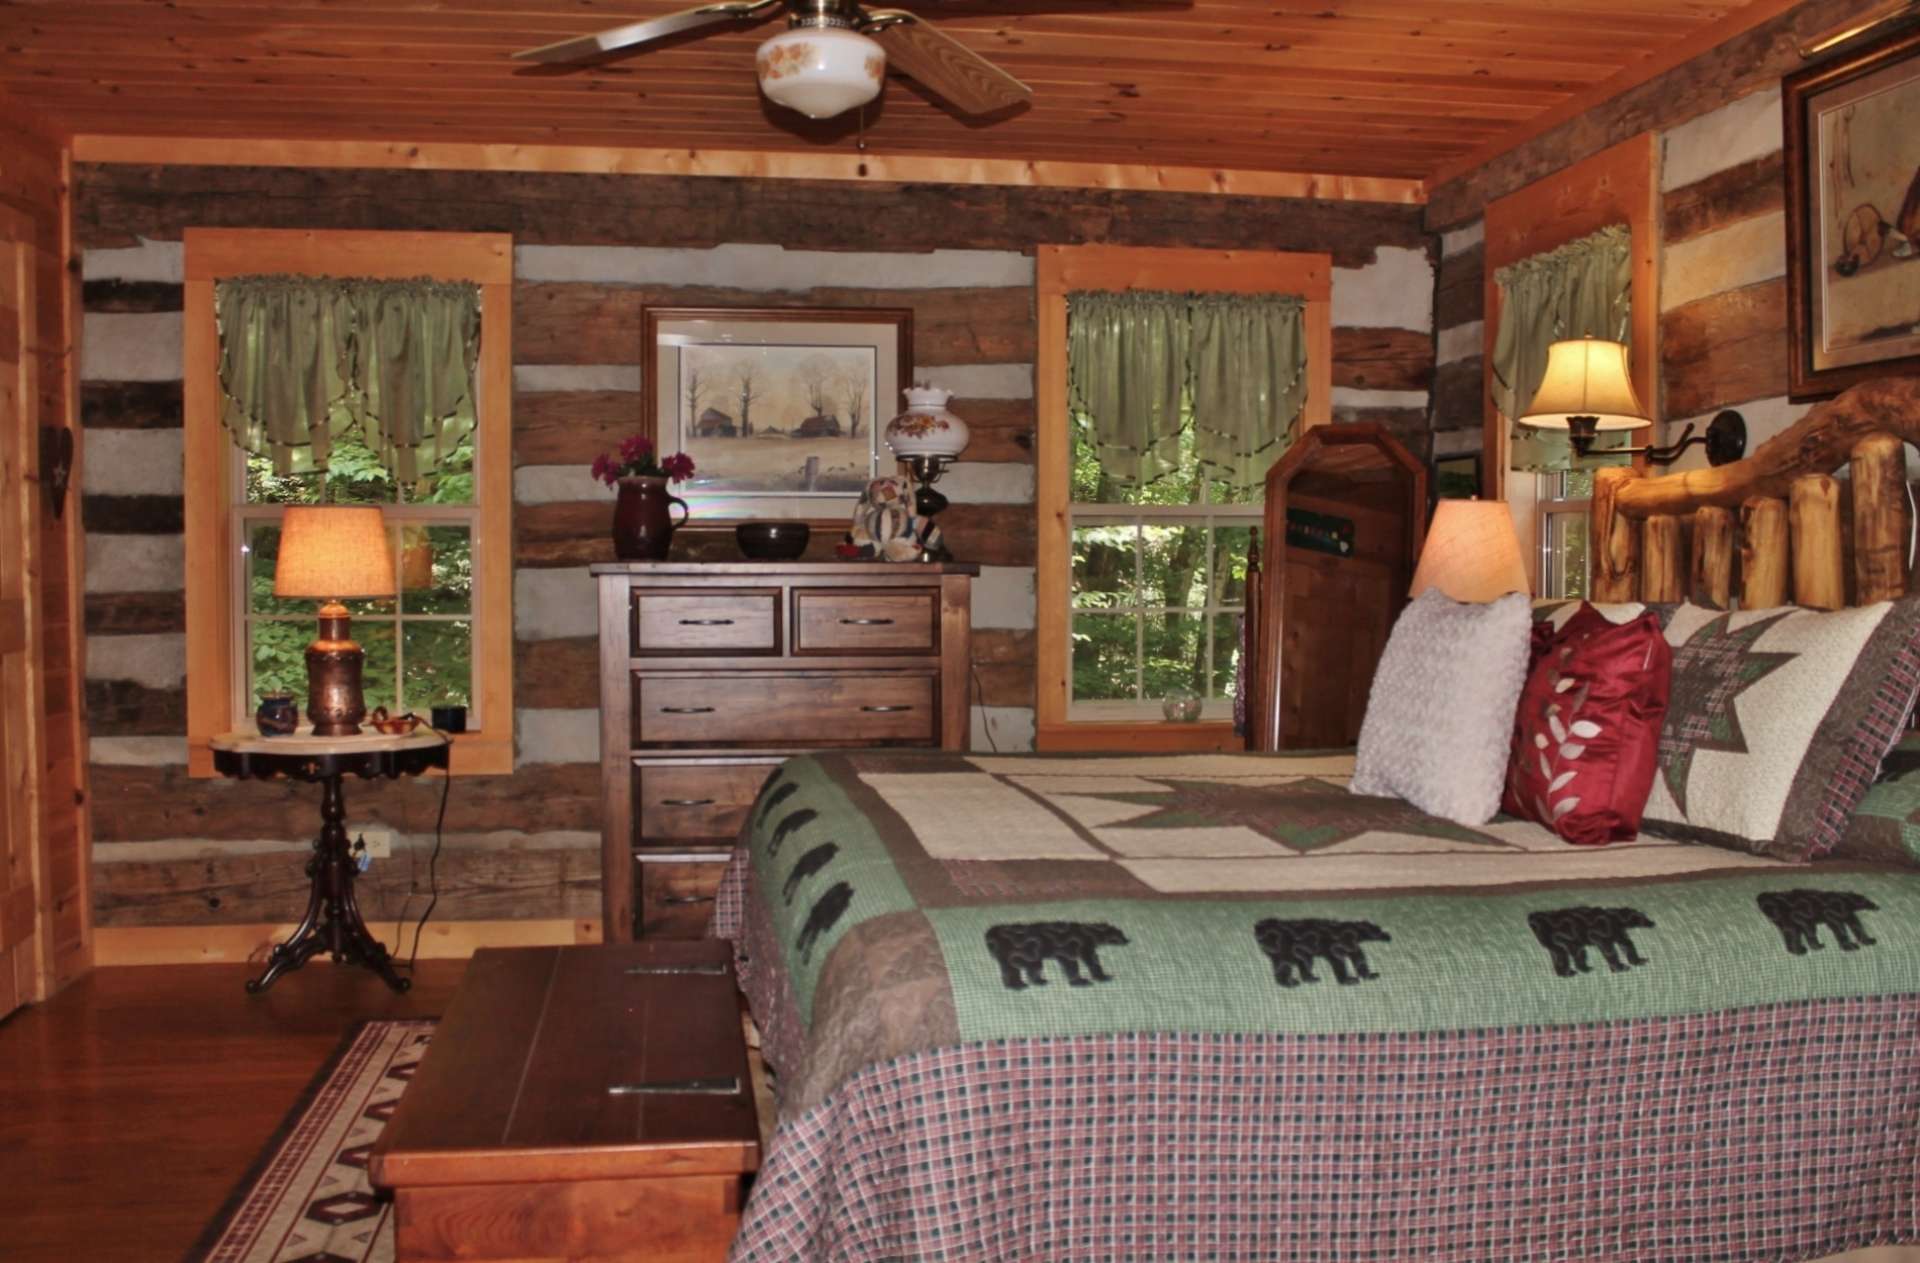 The spacious main level master suite offers plenty of windows and a private bath. Raise the windows and enjoy the sounds of the creek for a restful and peaceful night's sleep.